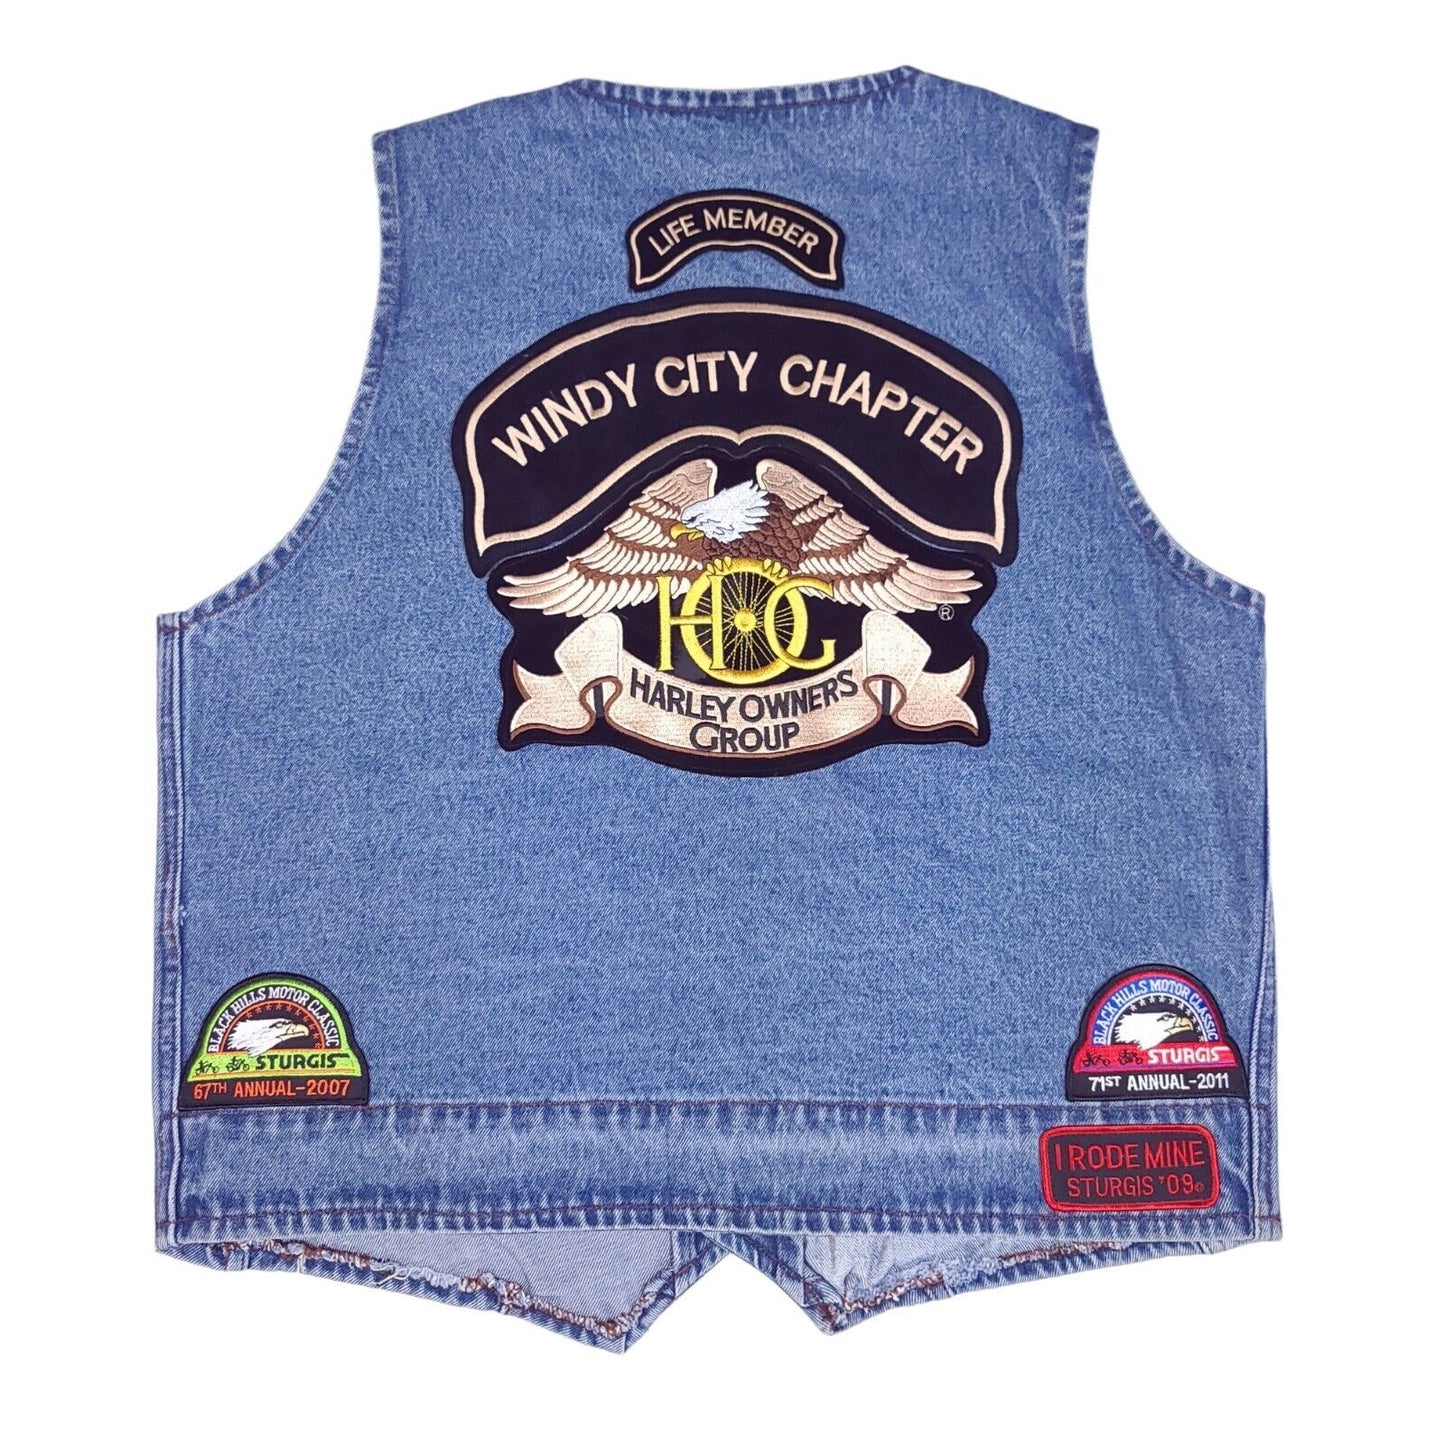 Harley Davidson Owners Group Windy City Chapter Denim Motorcycle Vest